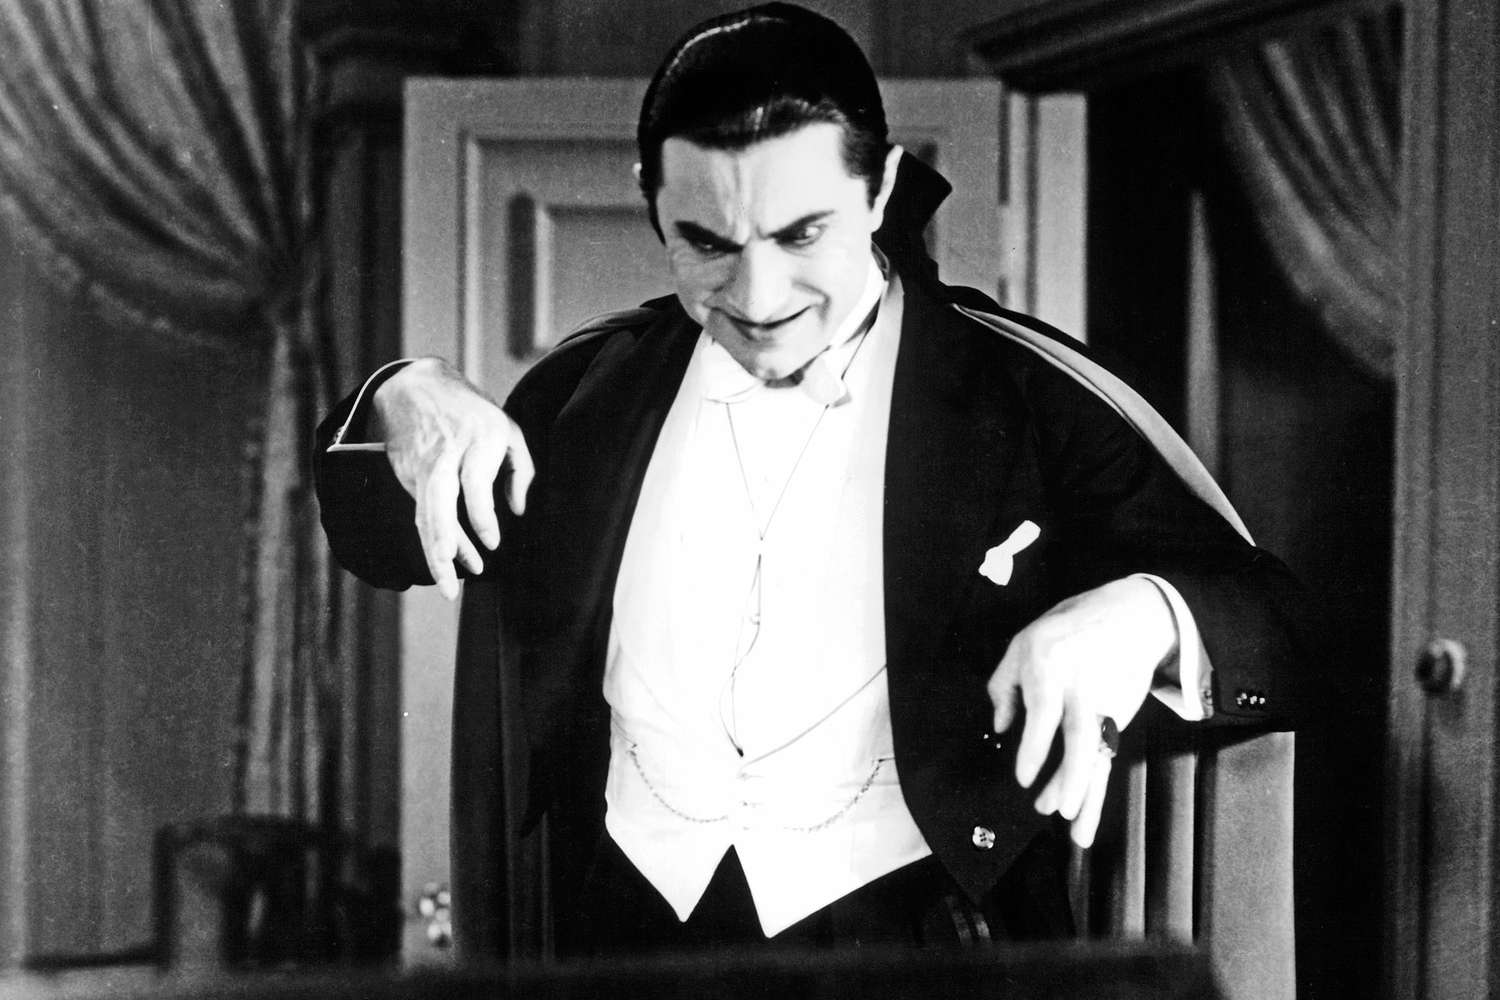 Bela Lugosi looking down as Count Dracula in a scene from the film 'Dracula', 1931. (Photo by Universal/Getty Images)